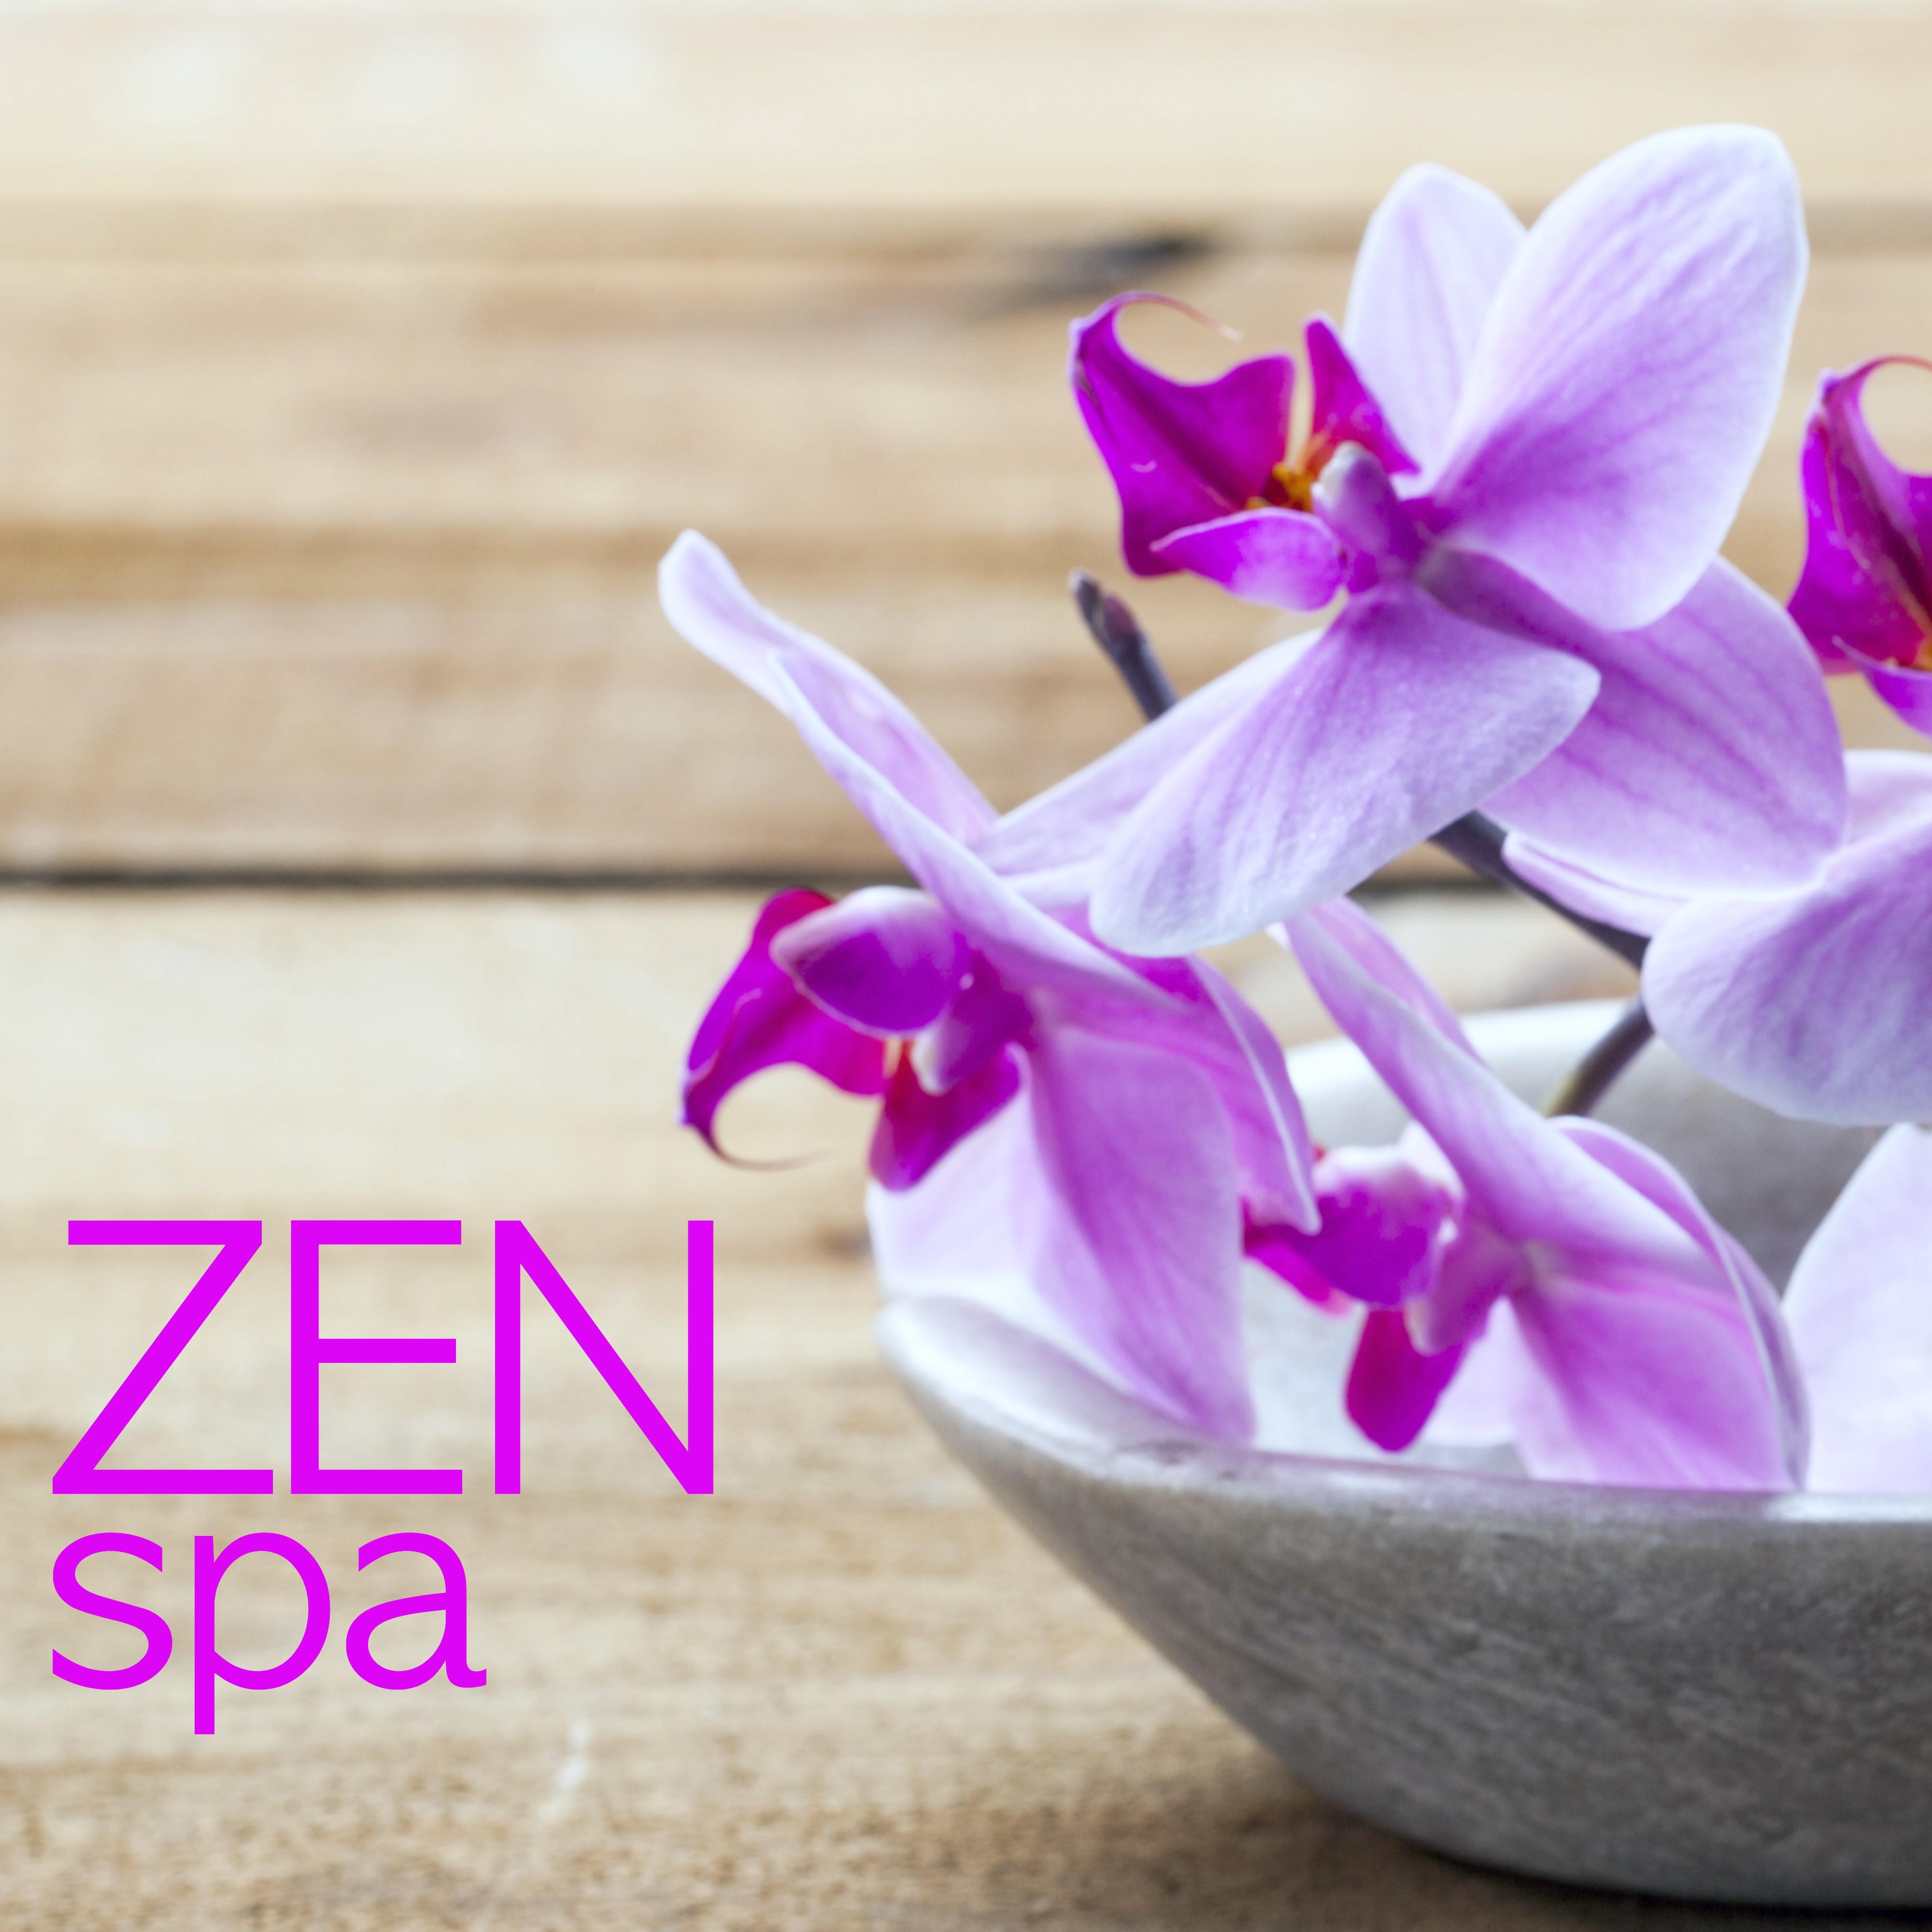 Zen Spa - Asian Zen Spa Music for Relaxation, Sound Therapy, Restful Sleep, Spa Relaxation, Meditation, Massage, Yoga & Relaxation Meditation